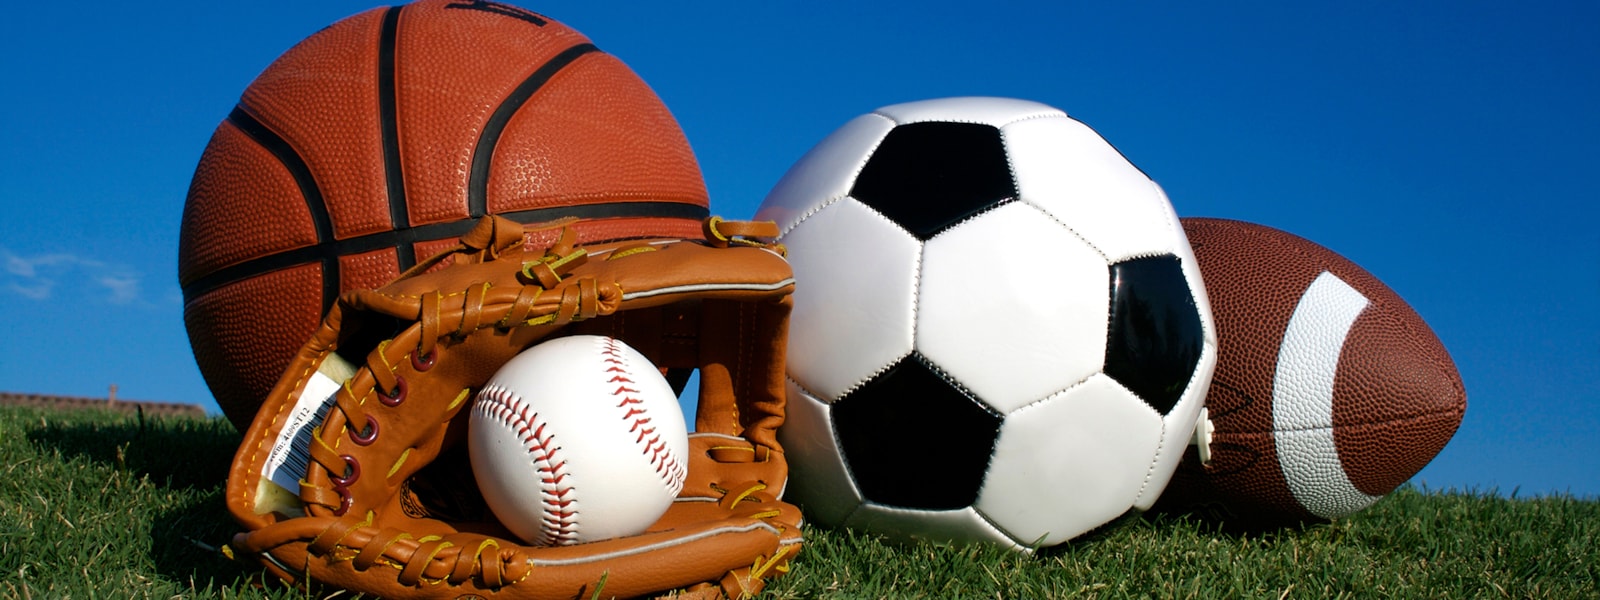 Picture of basketball, baseball with glove, soccer ball, and football